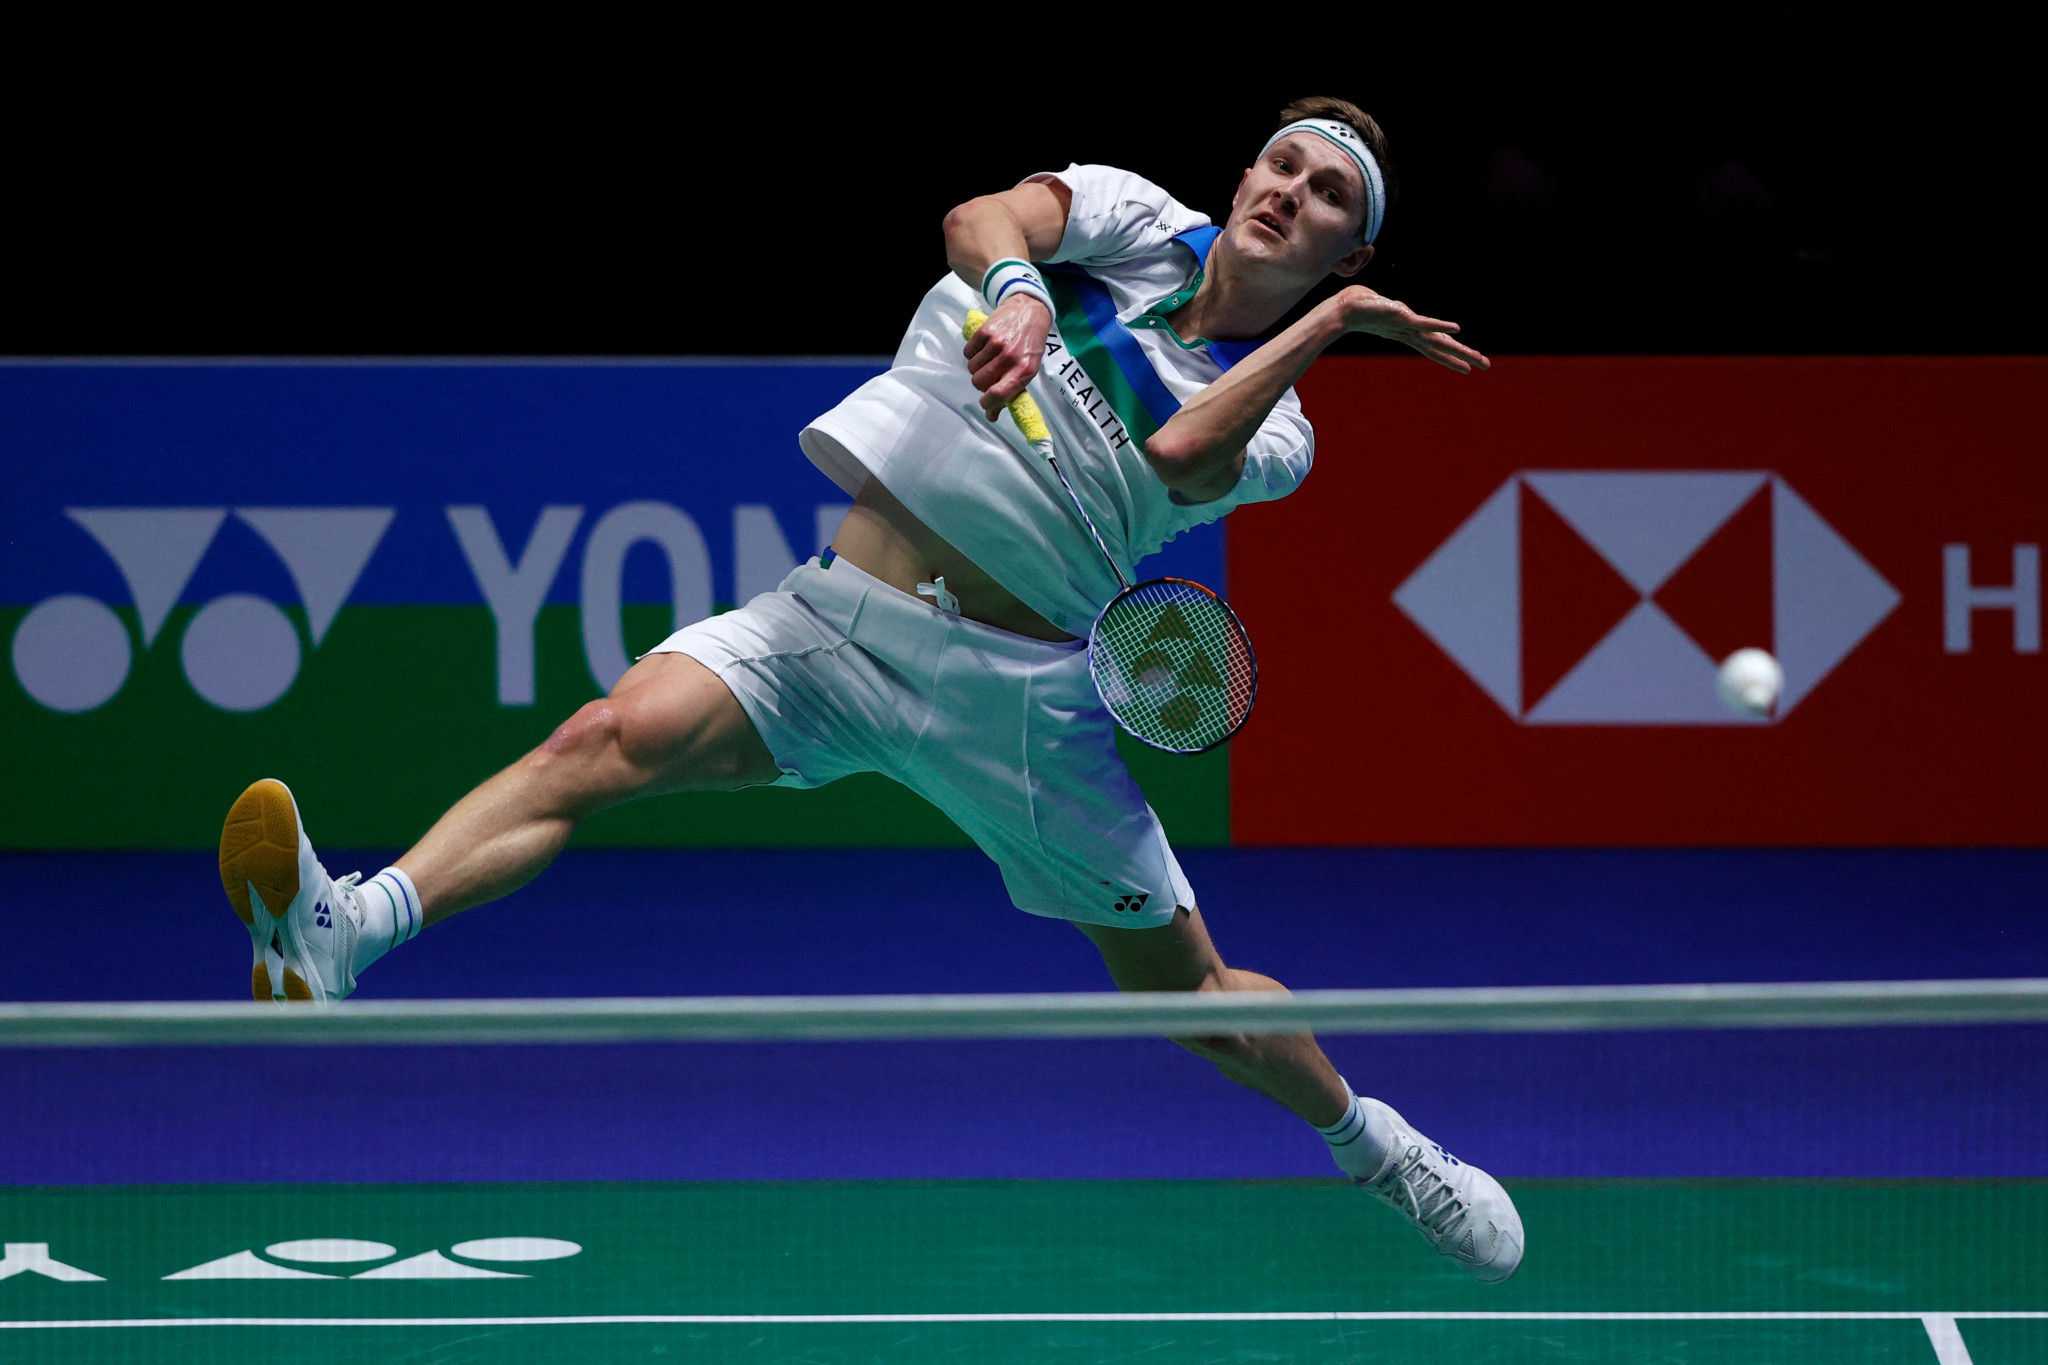 Viktor Axelsen of Denmark beat India’s Sai Praneeth in the All England Open ©Getty Images